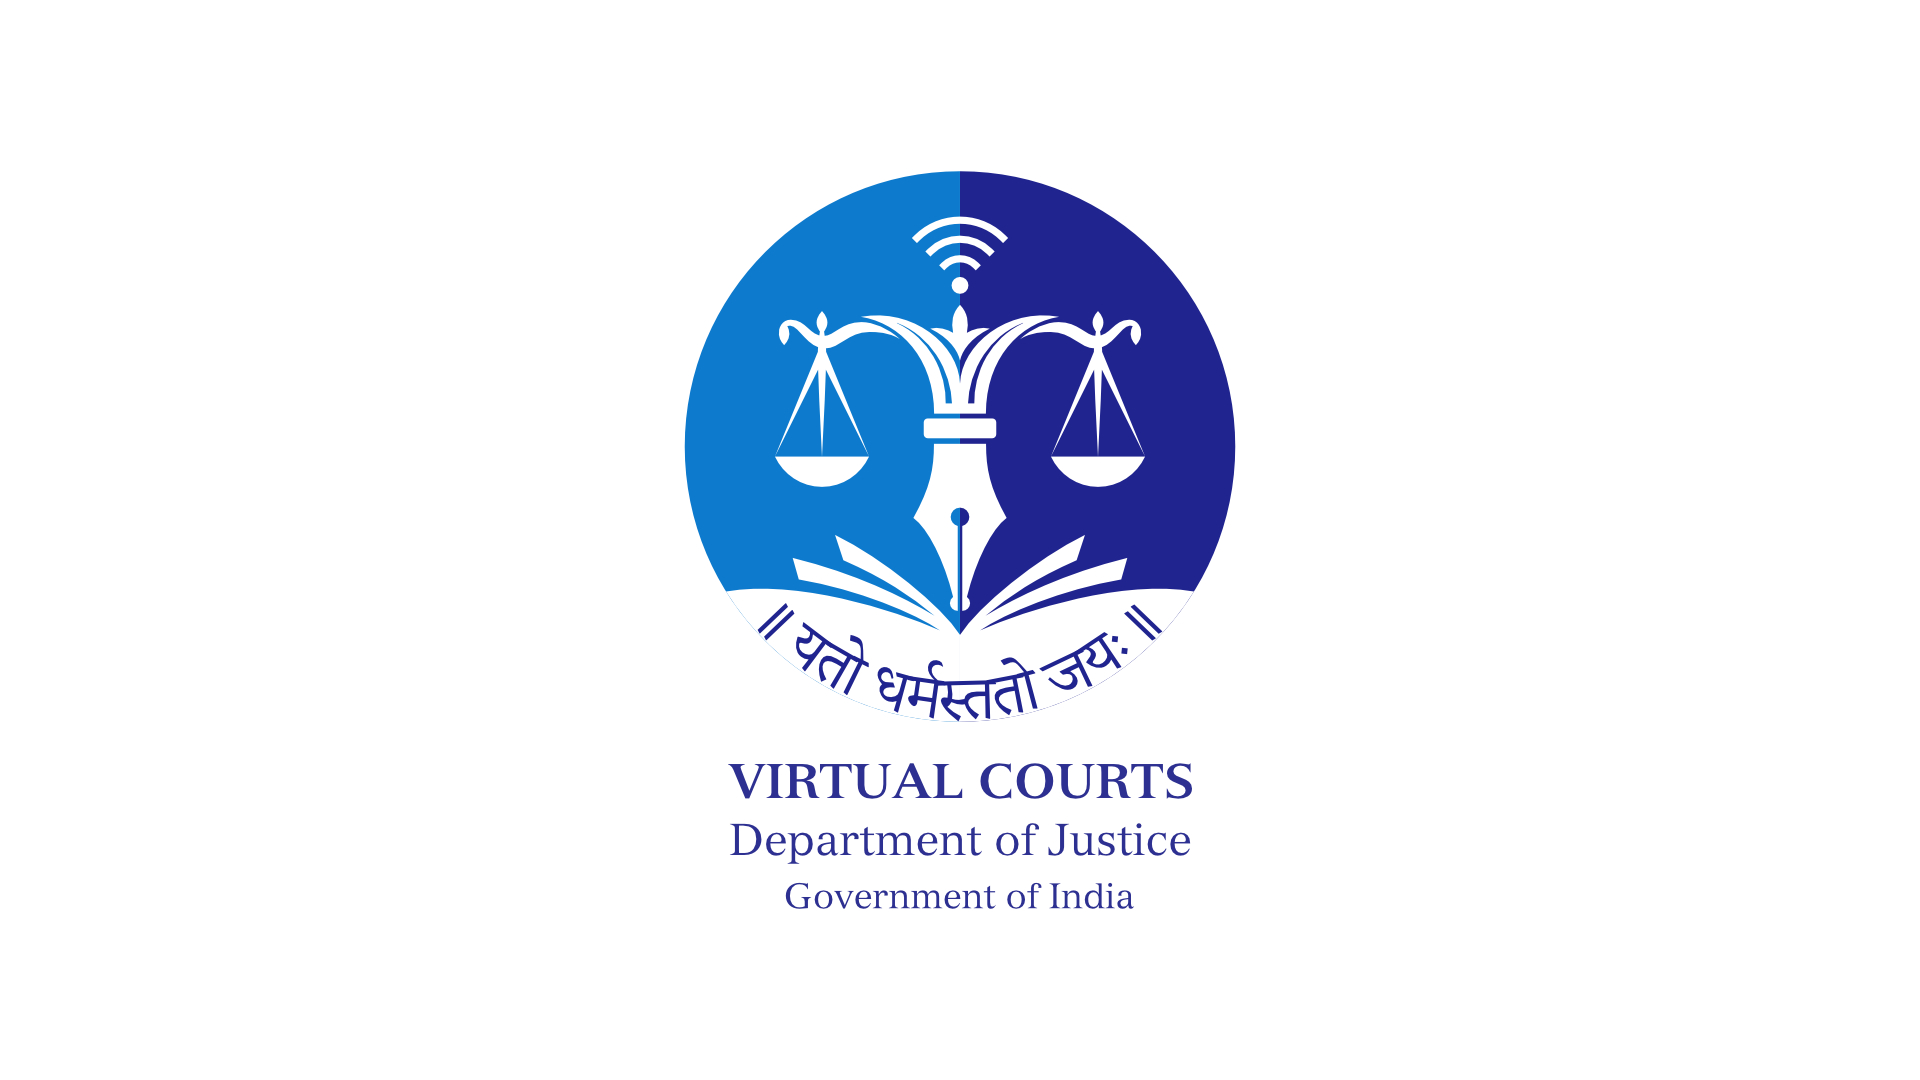 The logo is a visual expression of conducting virtual court sessions.The Network symbol is integrated within â€˜Vâ€™ illustrating the â€˜virtual courtâ€™ concept. 
The motto || à¤¯à¤¤à¥‹ à¤§à¤°à¥à¤®à¤¸à¥à¤¤à¤¤à¥‹ à¤œà¤¯: ||  is placed below the graphic form, completing the full circle.